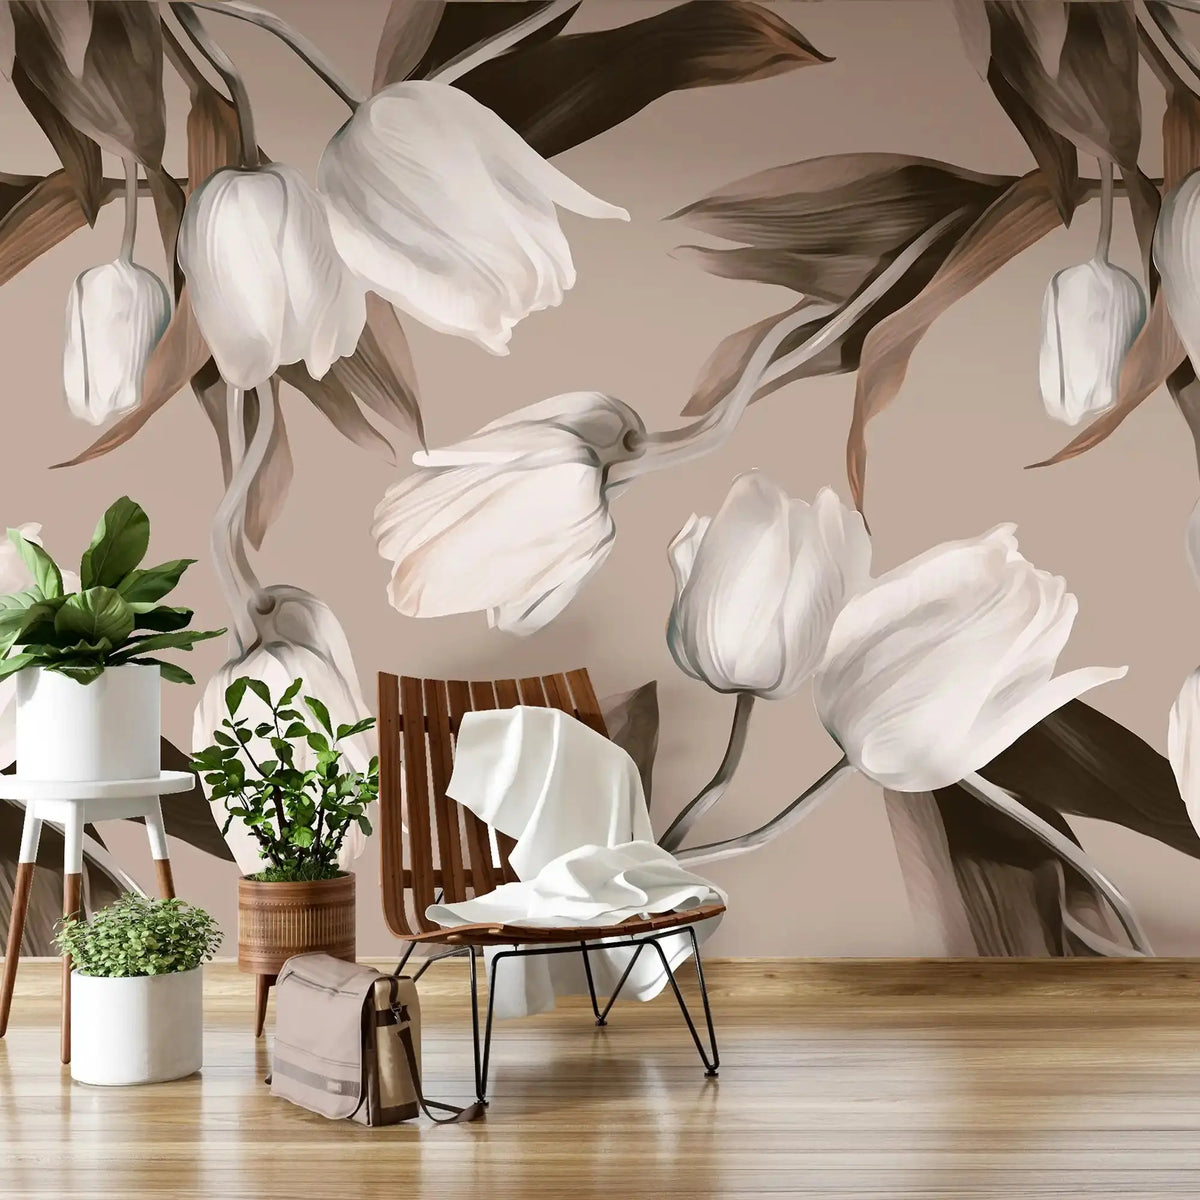 3094-E / Abstract Floral Peel and Stick Wallpaper, Tulips Modern Design Mural for Walls - Artevella